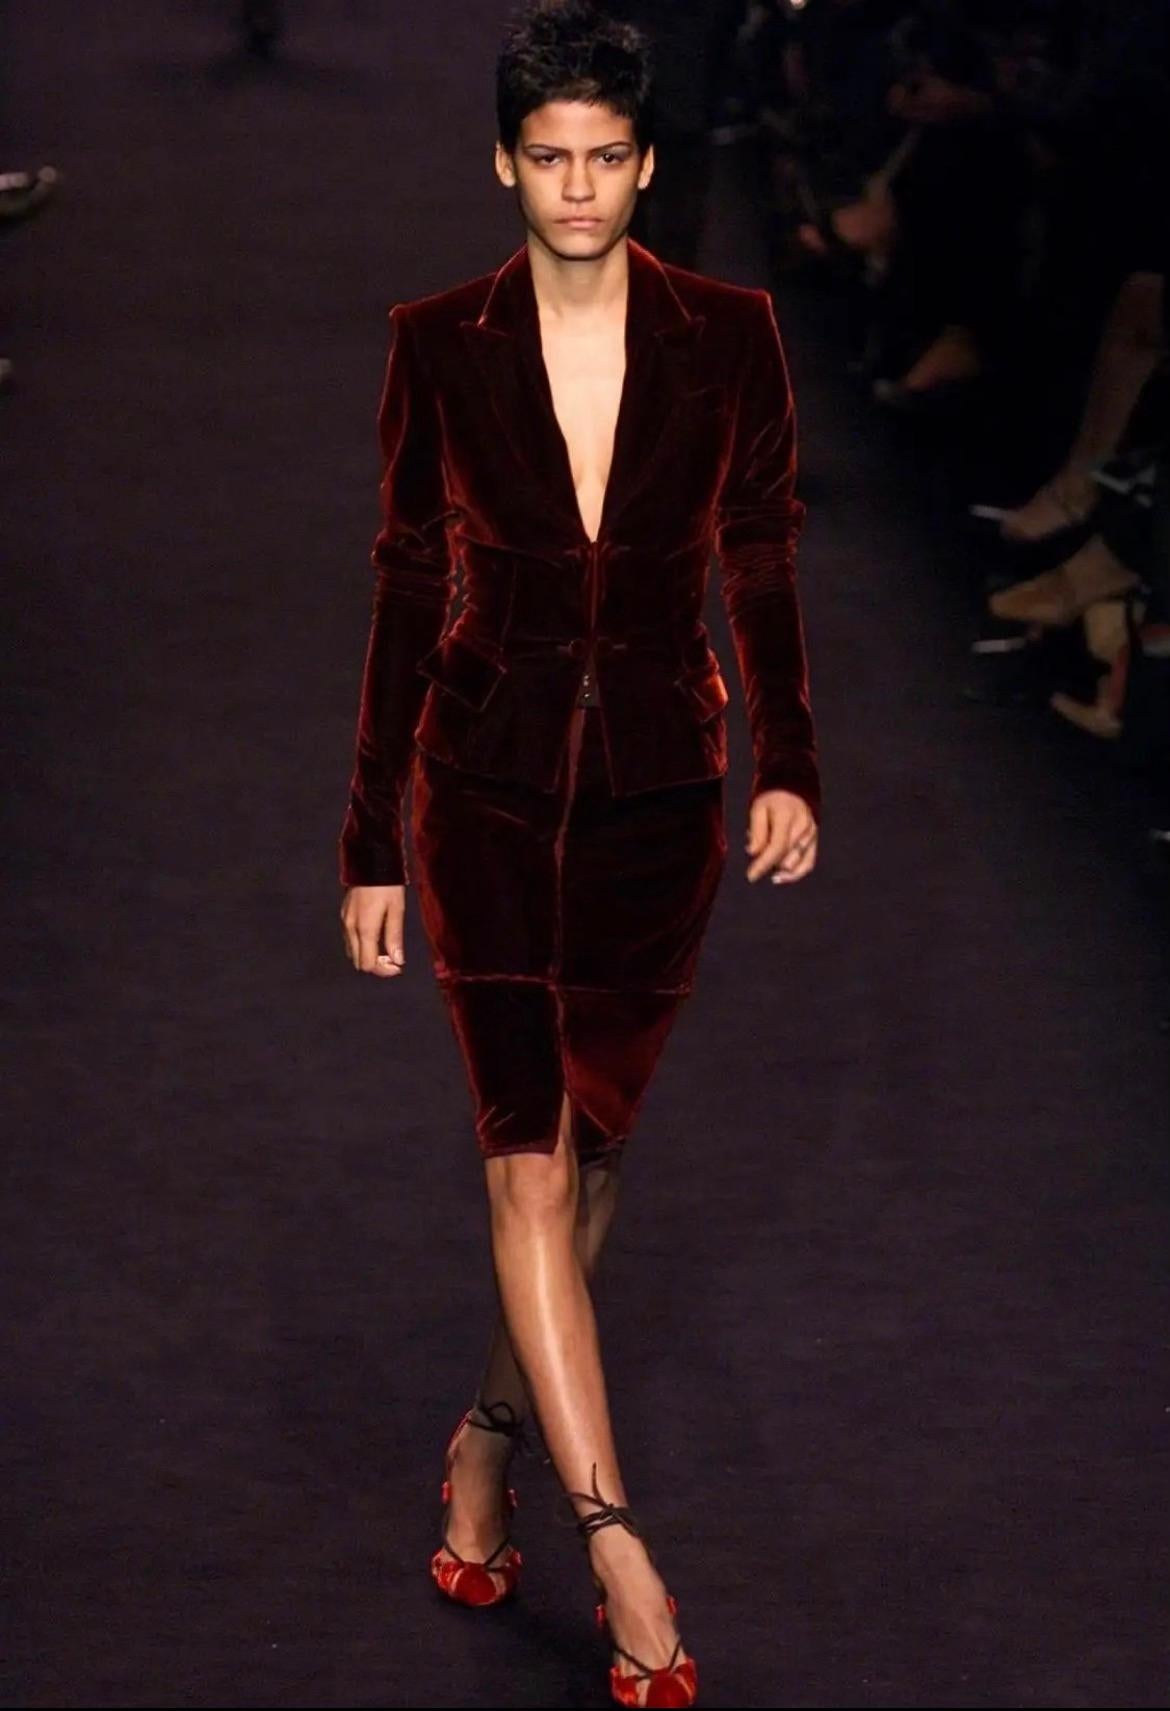 Presenting a fabulous navy blue velvet Yves Saint Laurent Rive Gauche blazer, designed by Tom Ford. From the Fall/Winter 2002 collection, this jacket was presented in red as part look 7 on that season's runway and was also seen on Julianne Moore.